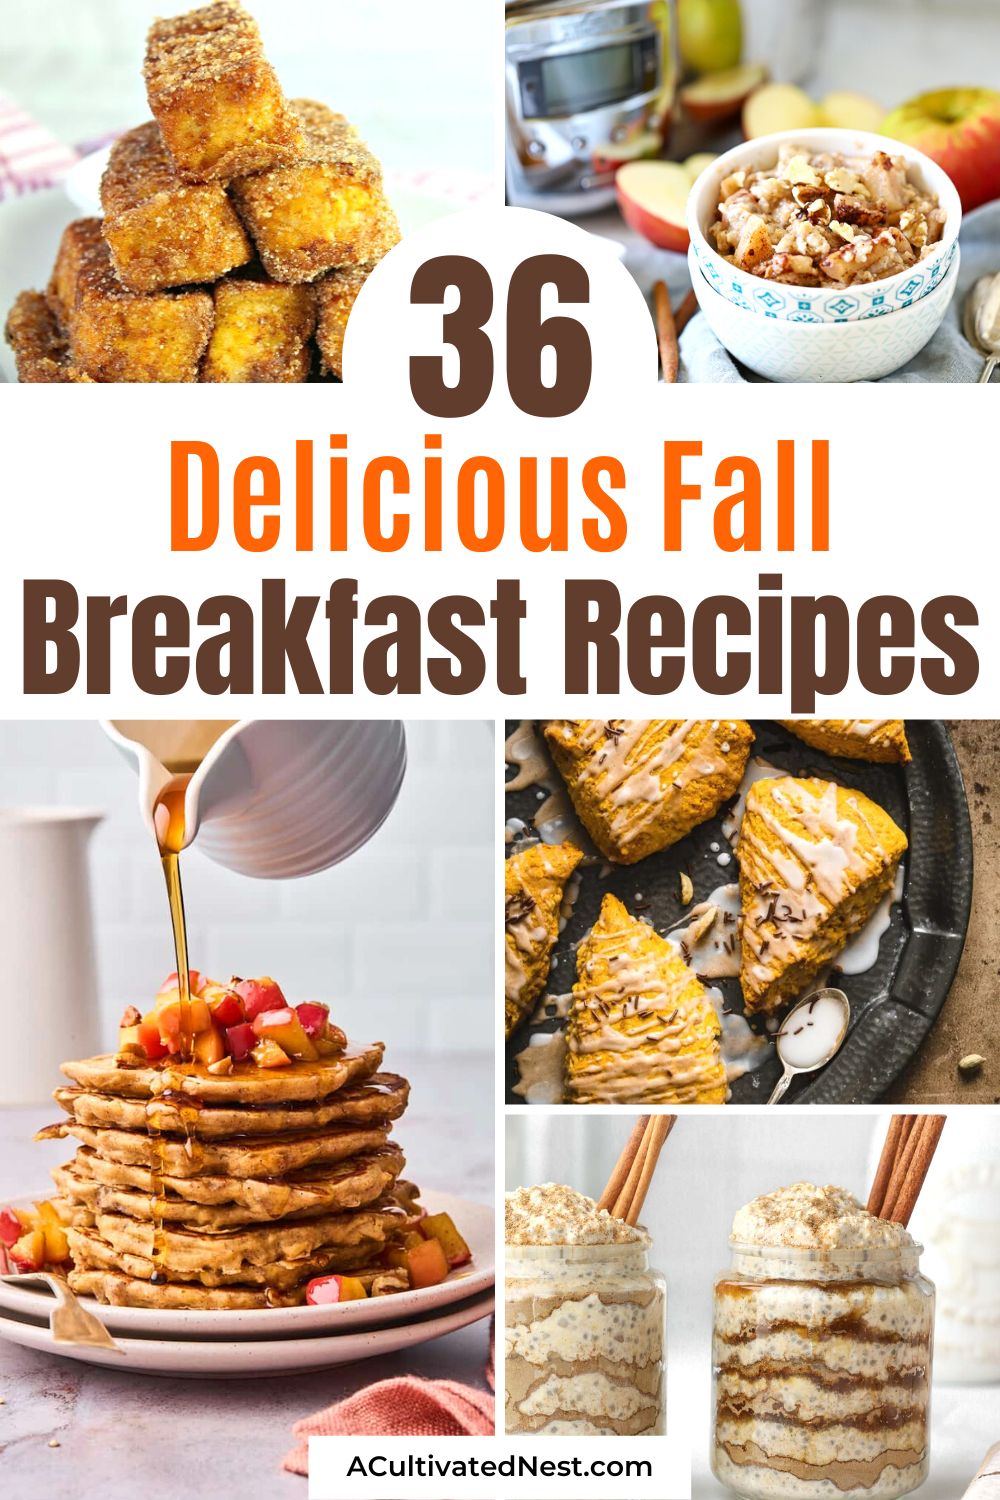 36 Tasty Fall Breakfast Recipes- Embrace the flavors of fall! Explore mouthwatering fall breakfast recipes to make your mornings unforgettable. Whether you love pumpkin, apple, or warm spices, we've got your autumn cravings covered. | #recipes #fallRecipes #pancakes #breakfastRecipes #ACultivatedNest